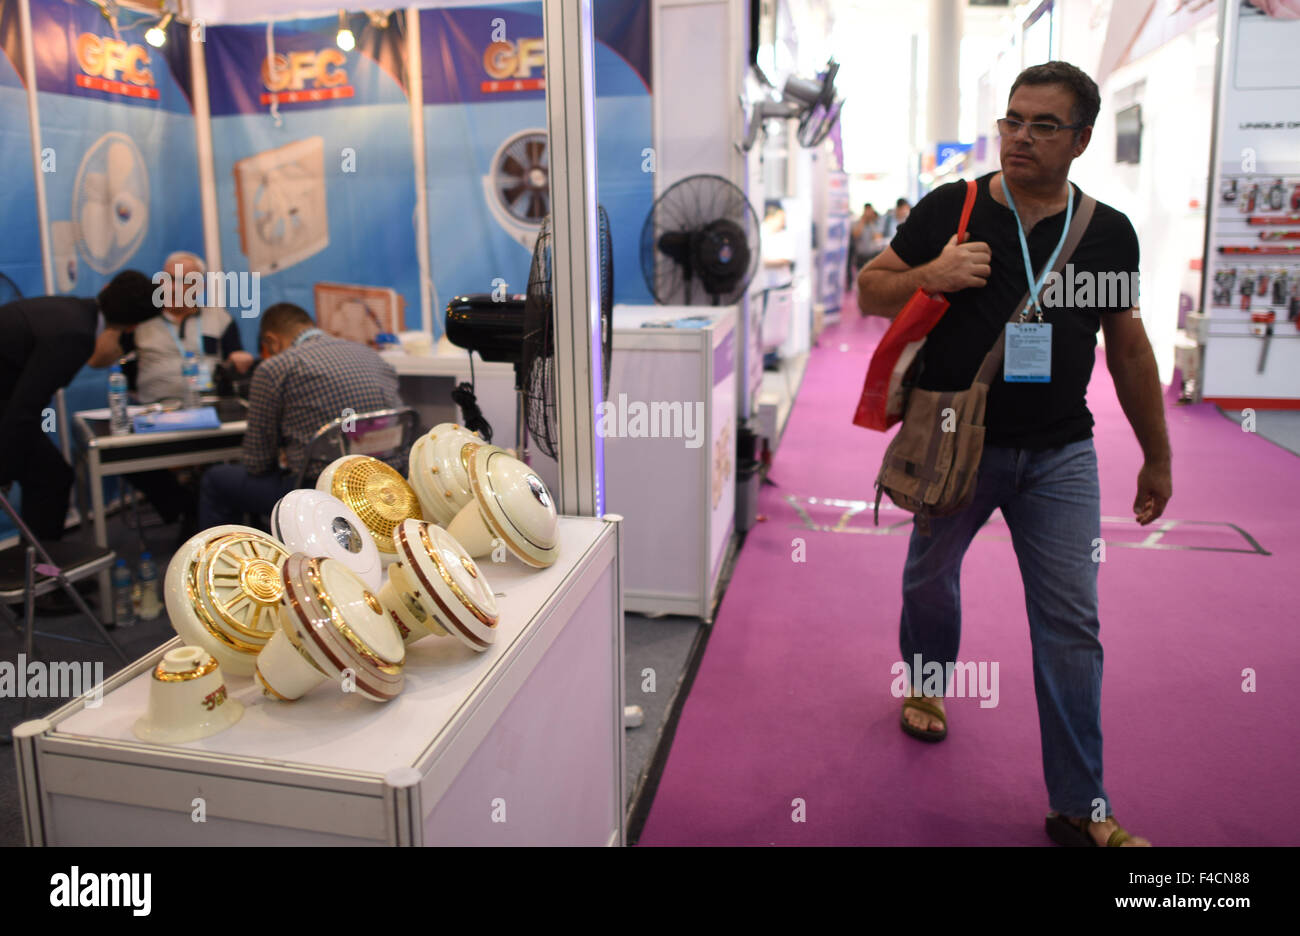 (151016) -- GUANGZHOU, Oct. 16, 2015 (Xinhua) -- A visitor is seen at the Pakistan booth during the China Import and Export Fair, or the Canton Fair, in Guangzhou, capital of south China's Guangdong Province, Oct. 16, 2015. A total of 353 enterprises from countries and regions along the 'Belt and Road' participated the current Canton Fair held in Guangzhou, which took nearly 60 percent of all exhibitors. The 'Belt and Road' initiative, standing for the Silk Road Economic Belt and the 21st Century Maritime Silk Road, was unveiled by Chinese President Xi Jinping in 2013. It brings together count Stock Photo